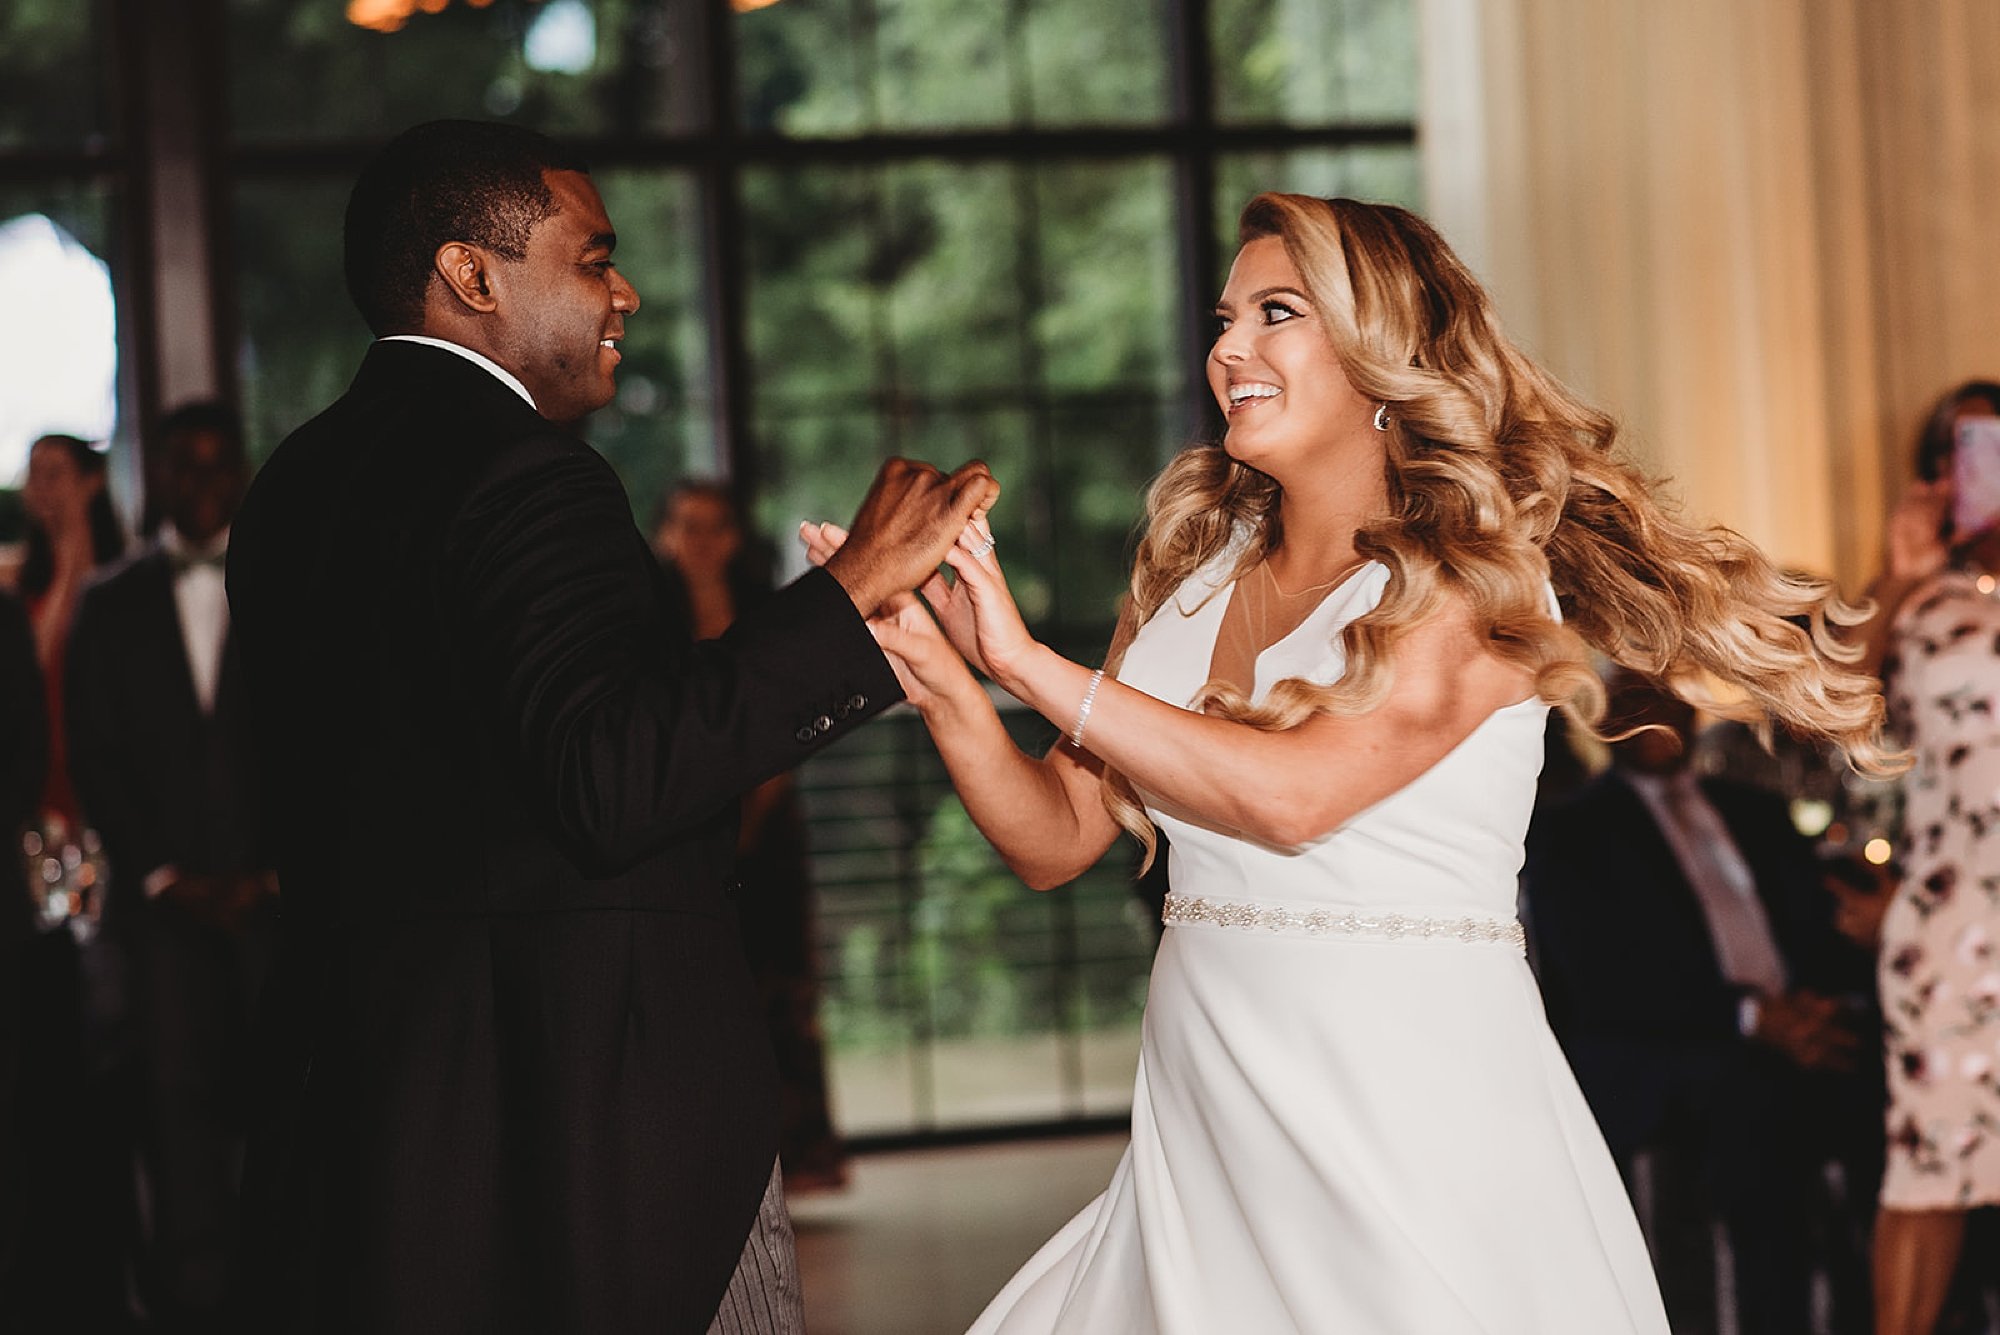 bride and groom's first dance at Beacon NY wedding reception